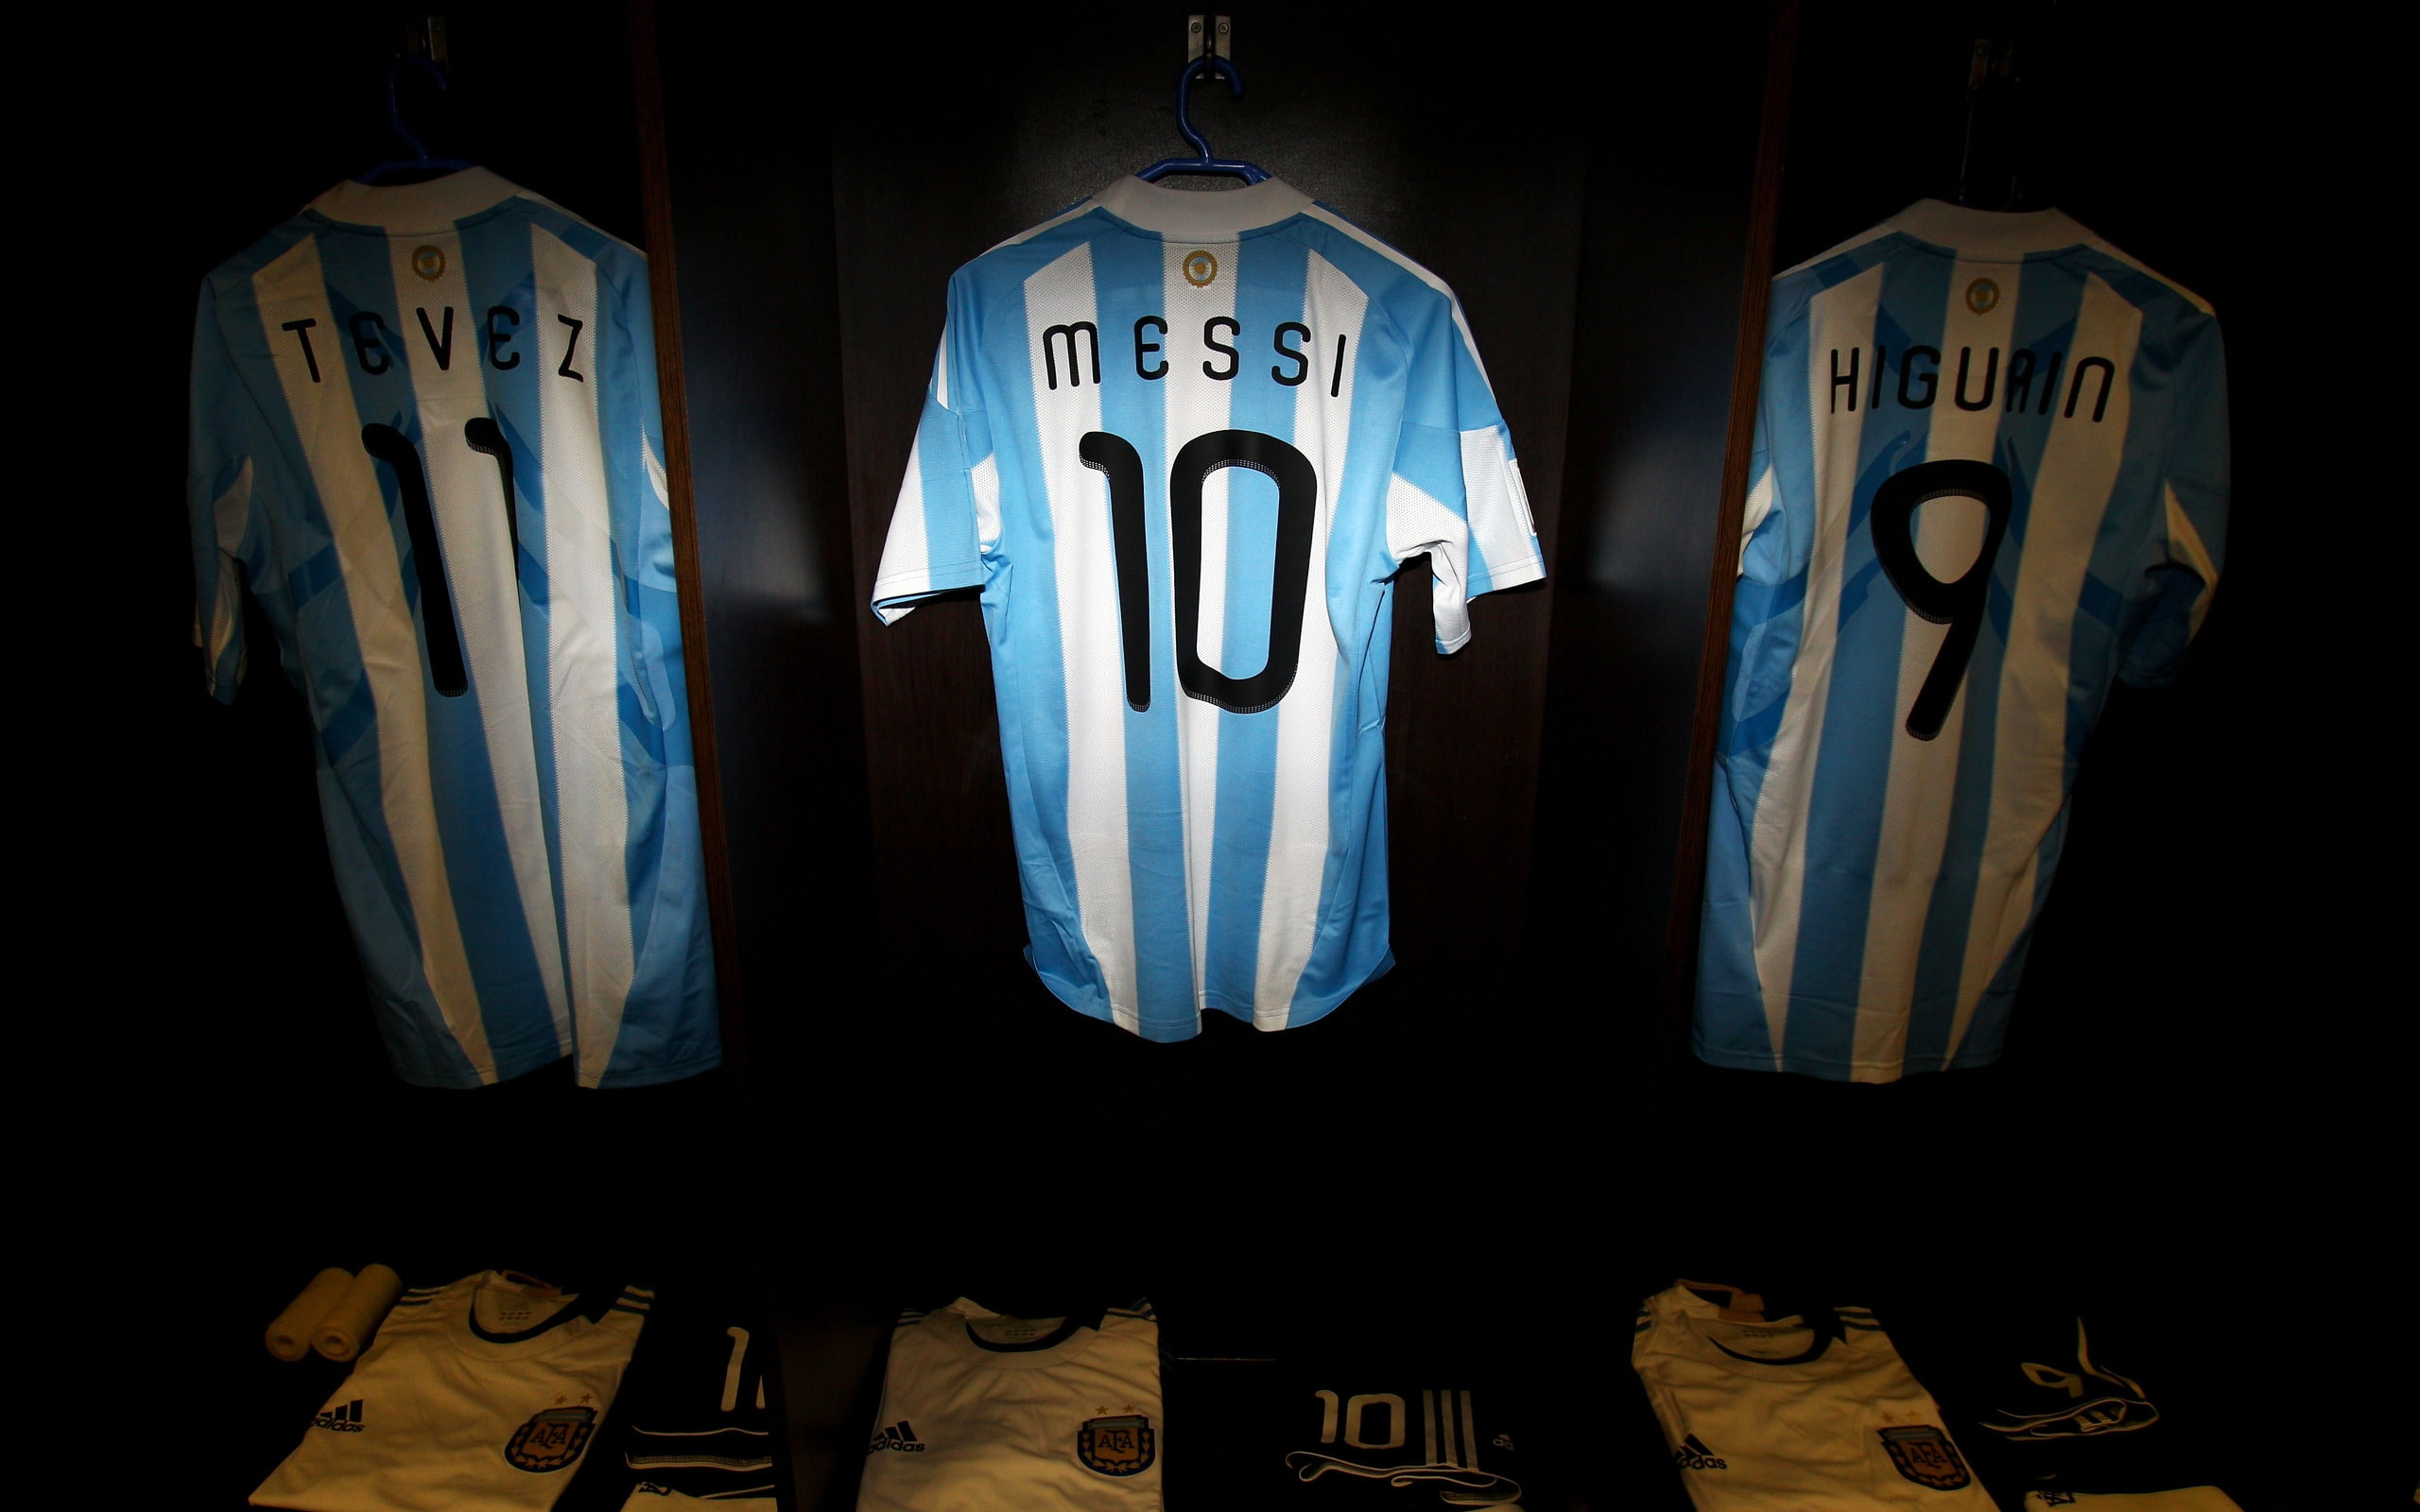 Tshirt of Messi, Tevez and Higuain, lionel, argentina, player